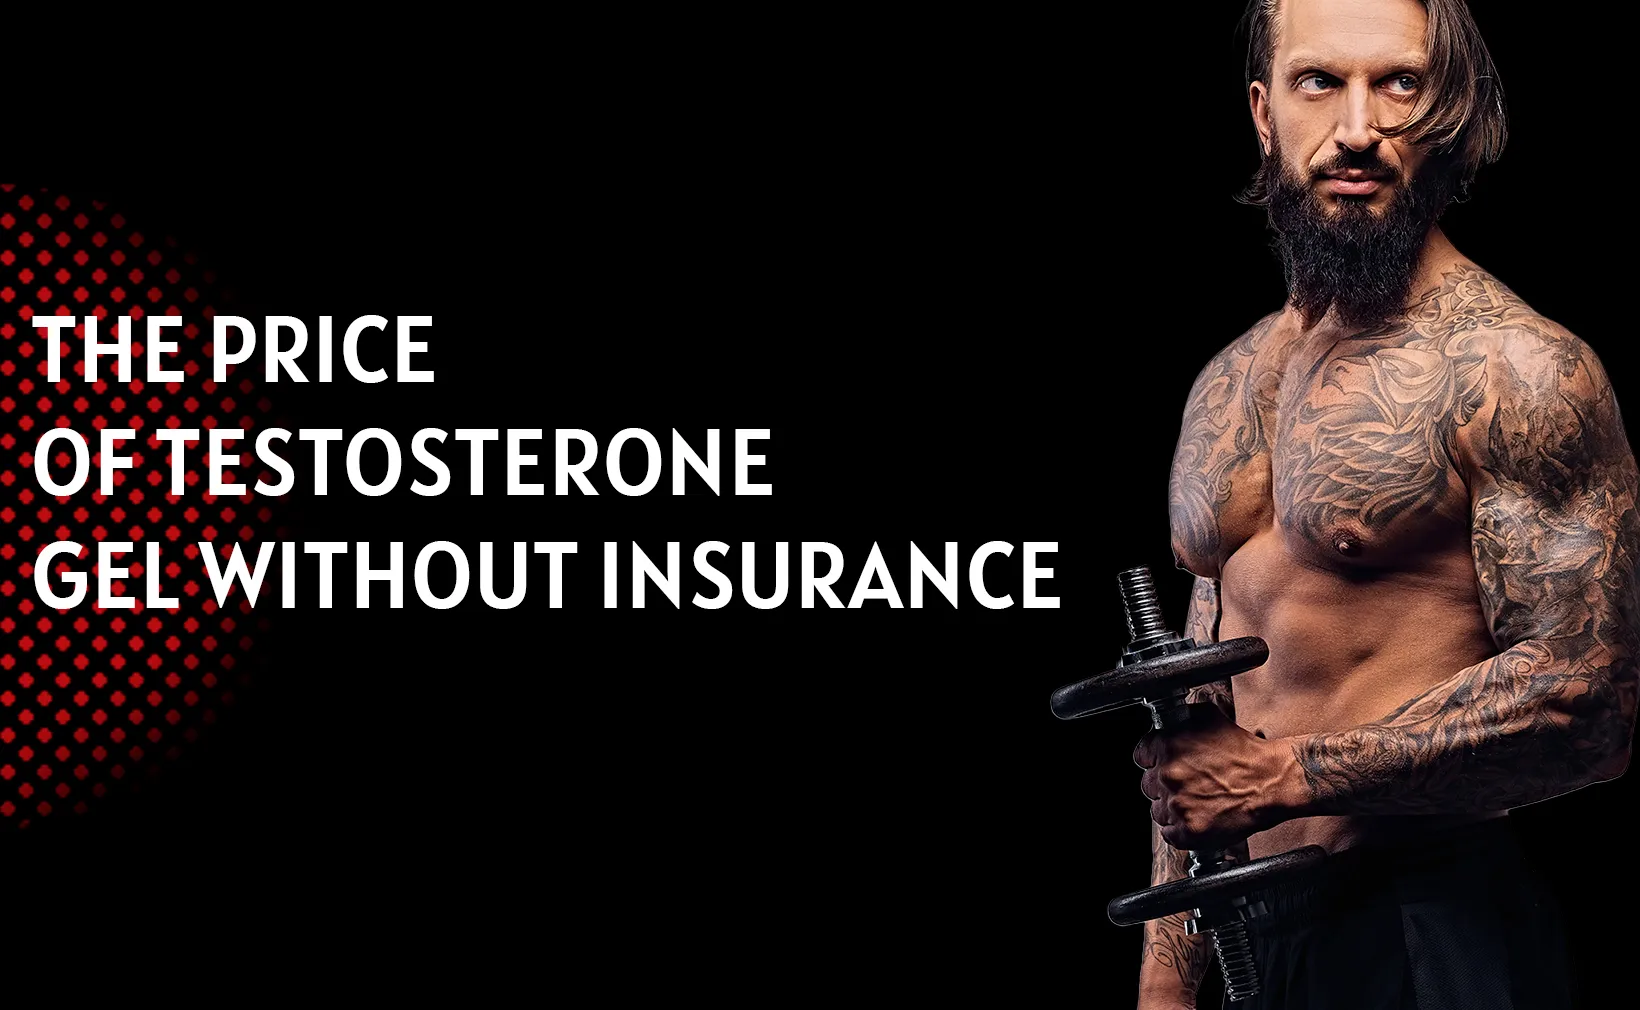 The Price of Testosterone Gel